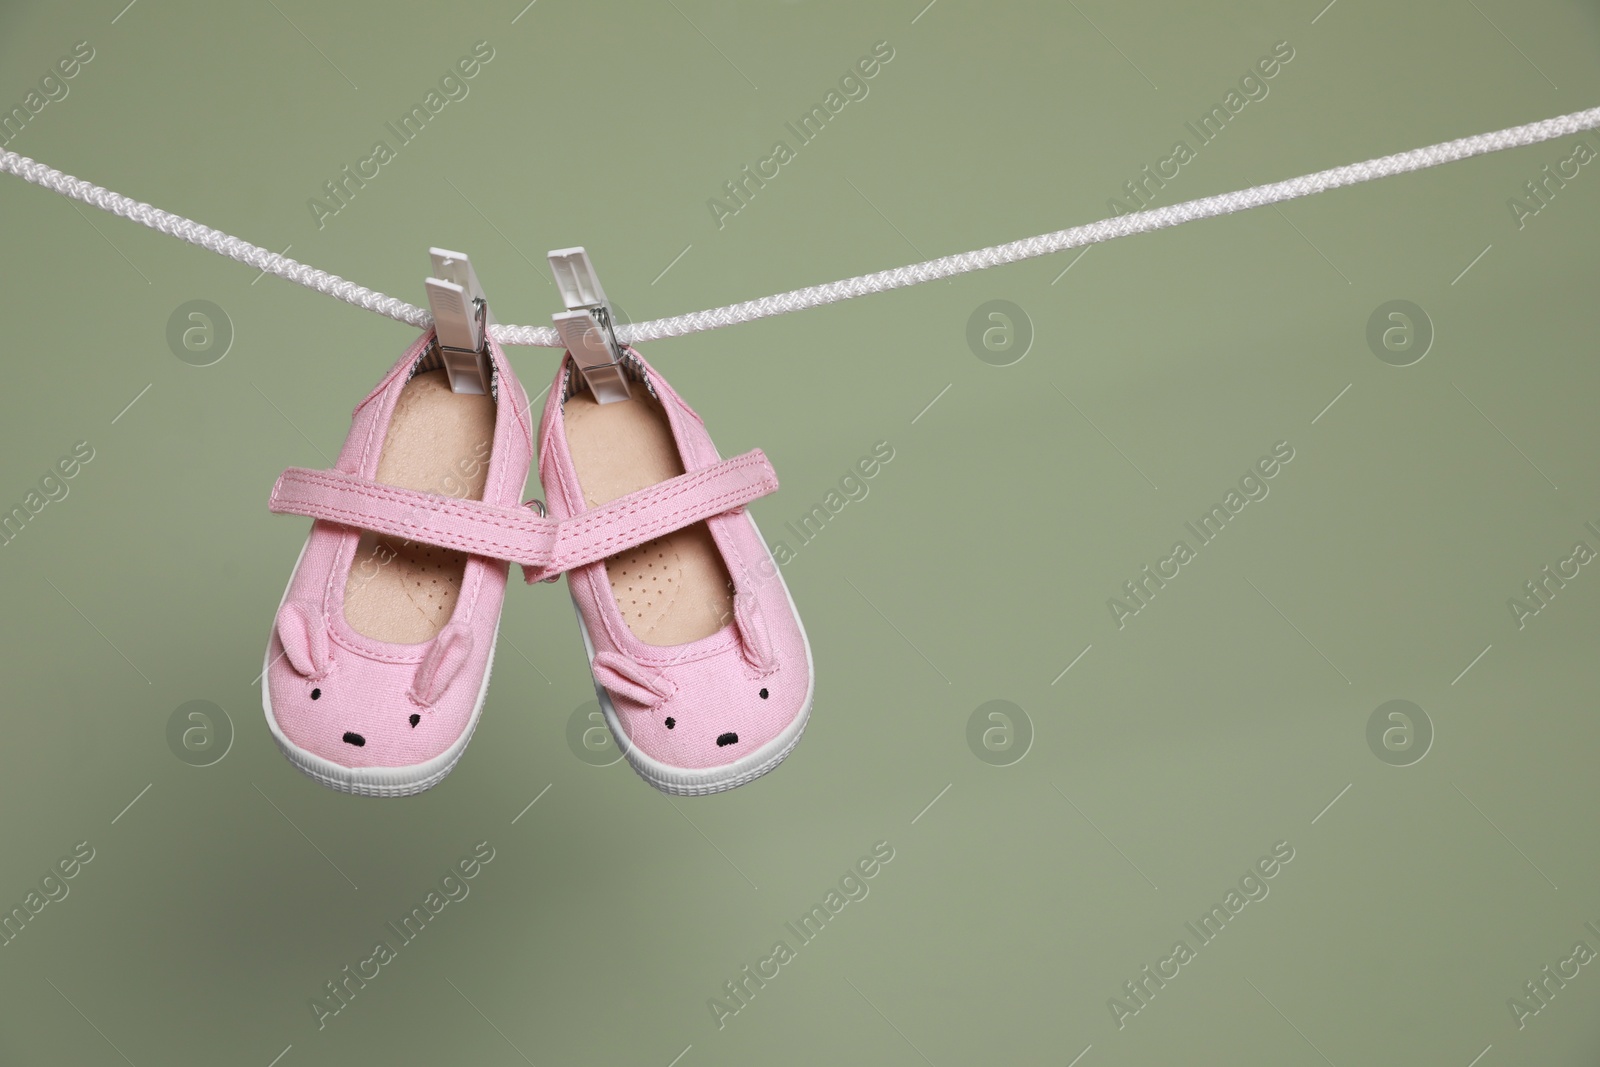 Photo of Cute small baby shoes hanging on washing line against green background, space for text